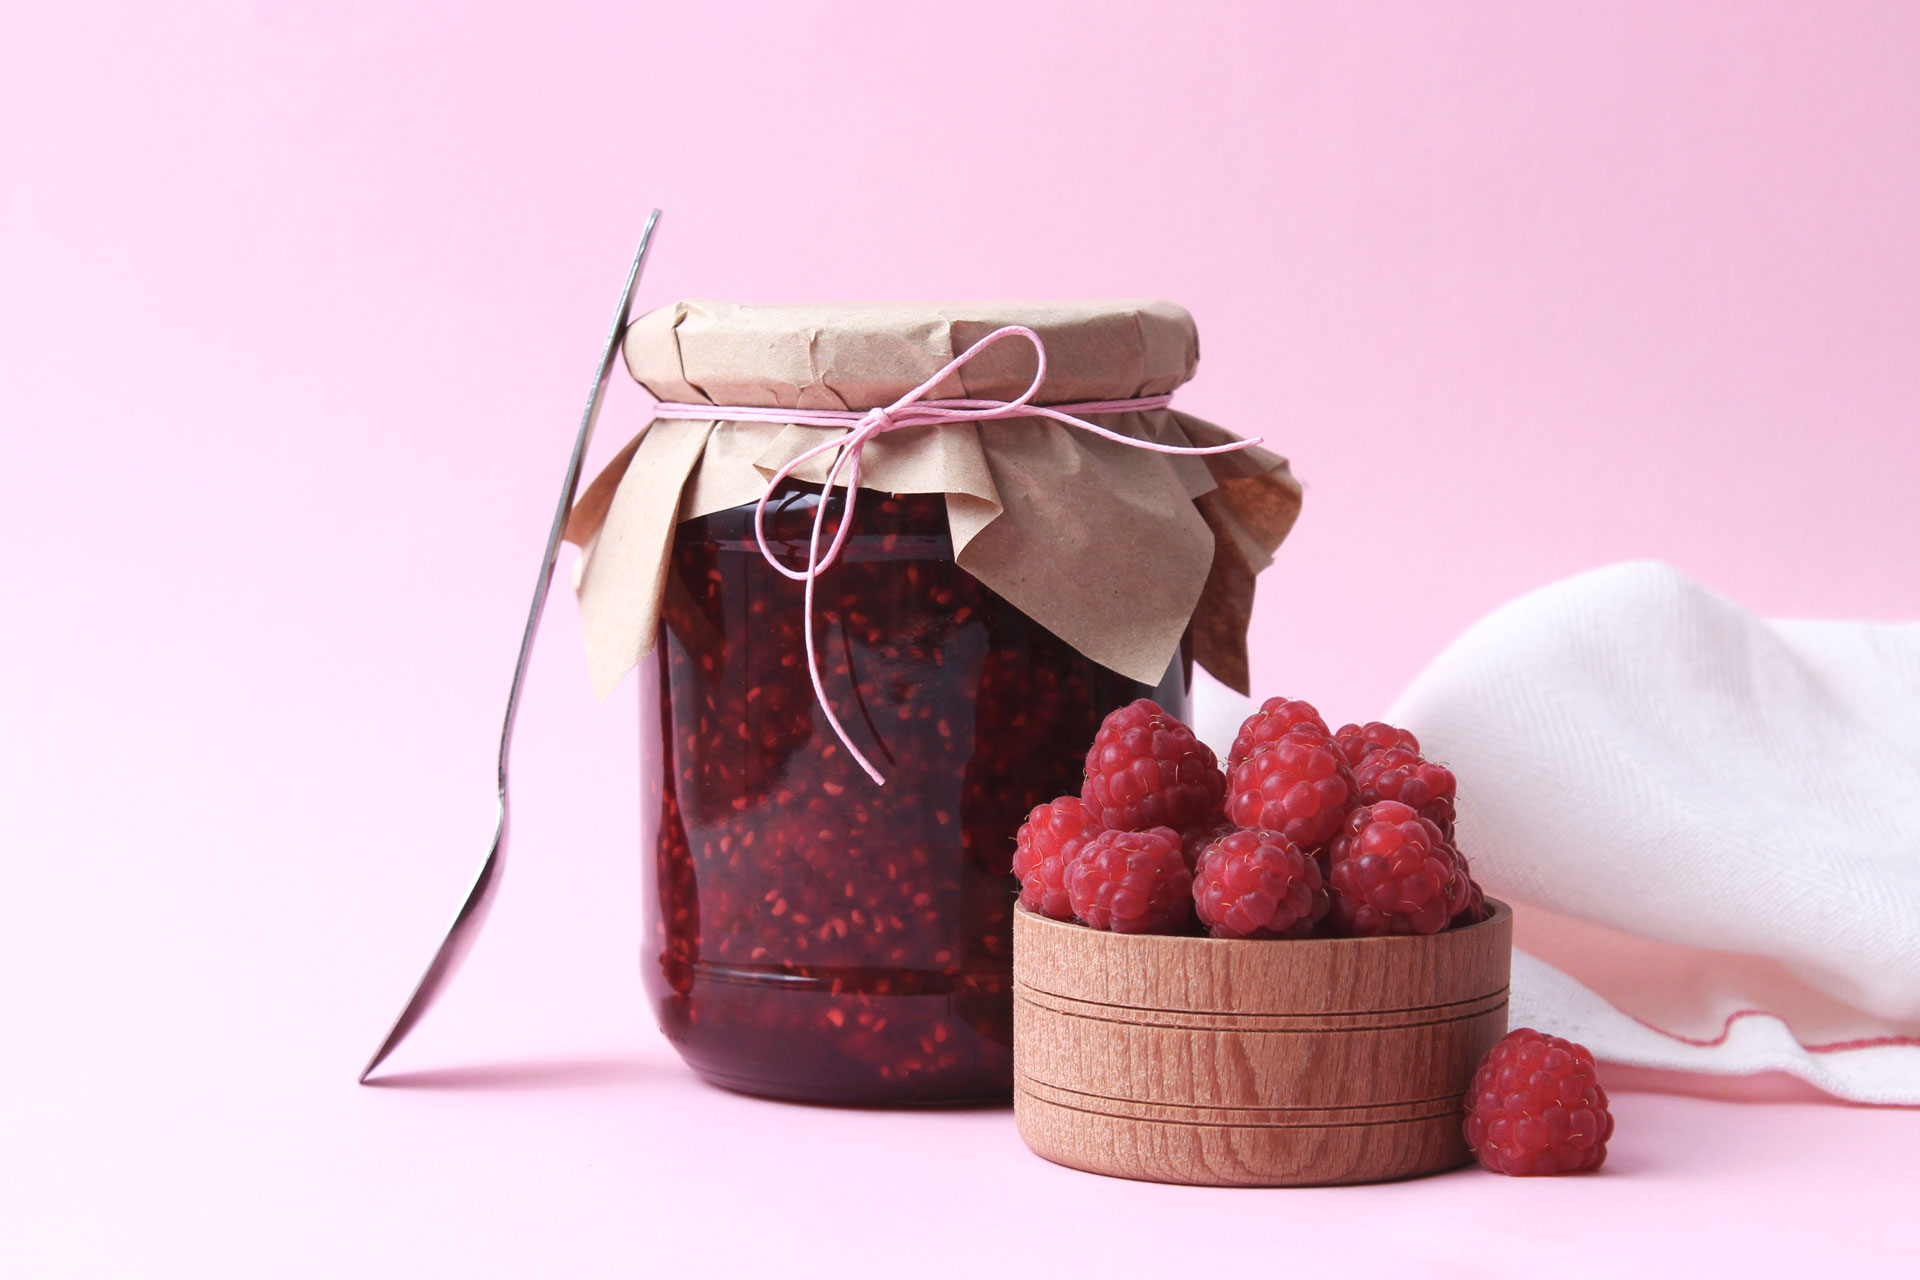 homemade jam from raspberries on a colored background